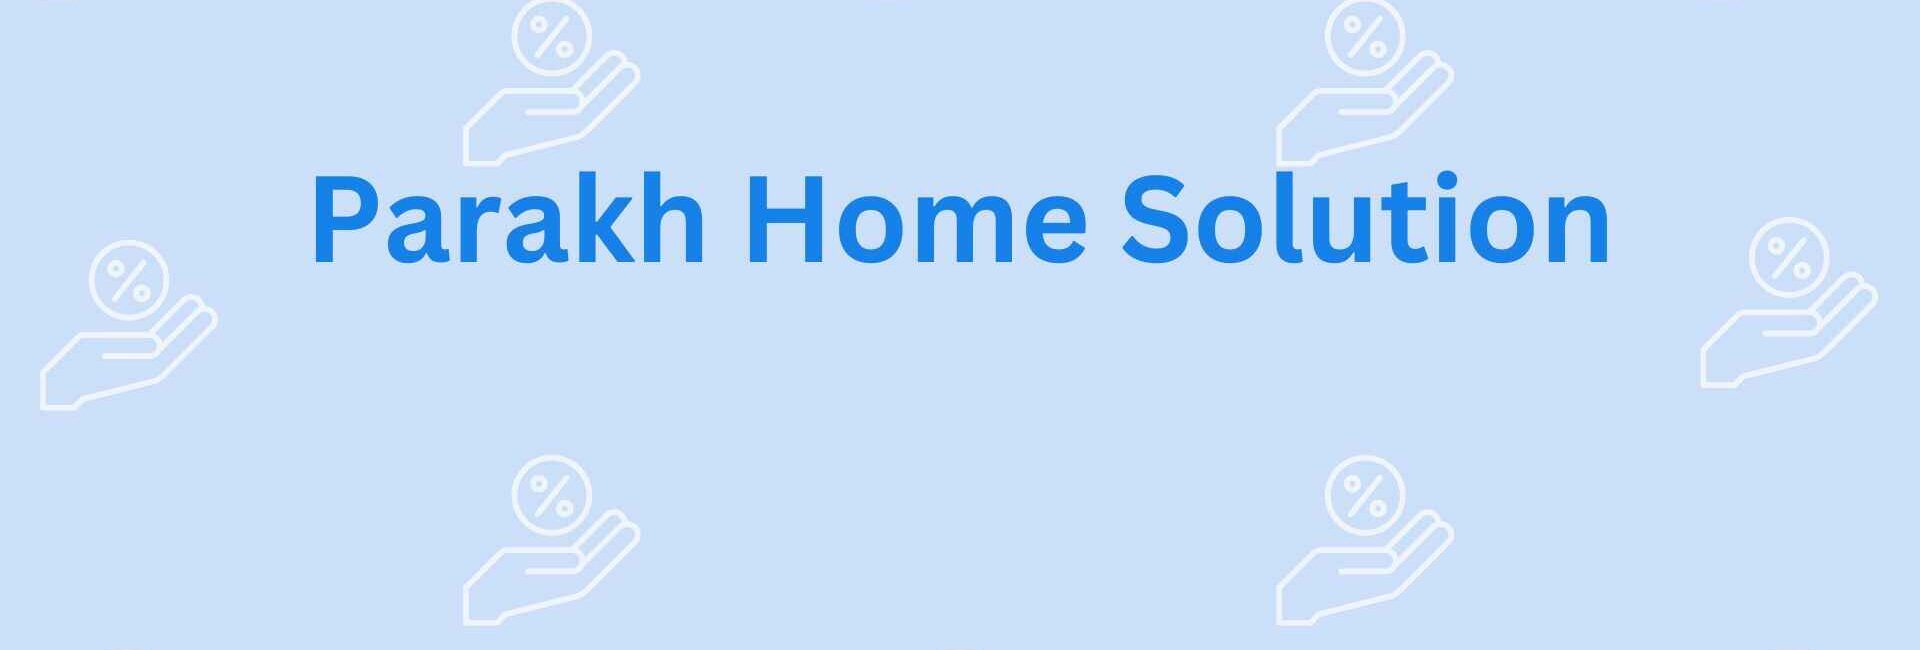 Parakh Home Solution- Home Loan Assistance Professionals in Noida